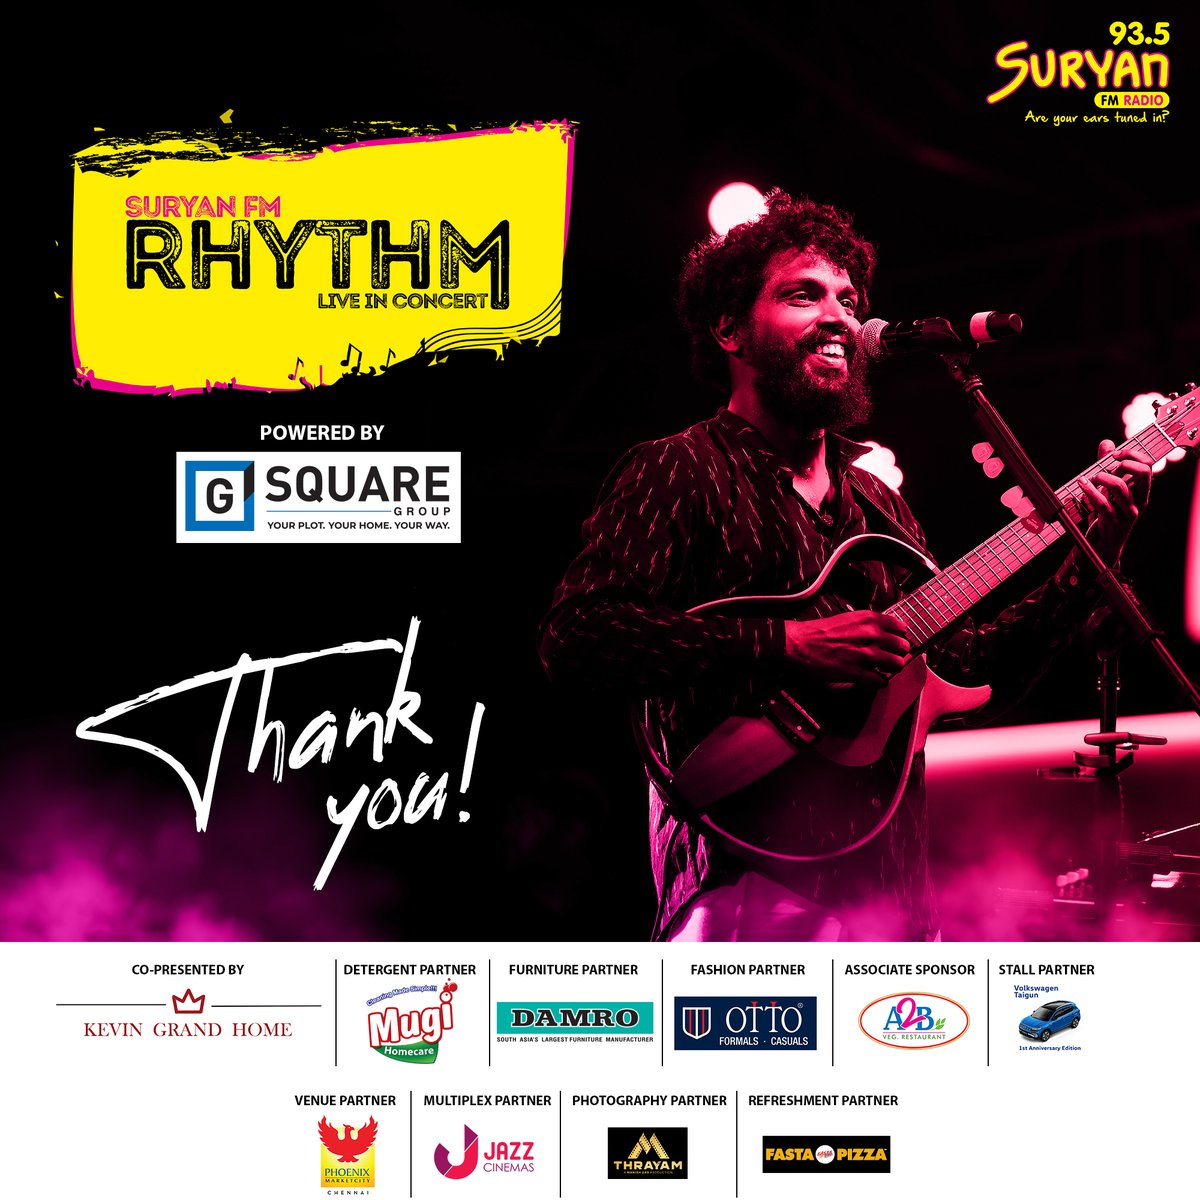 Success is best when it is shared!
Privileged to share the huge success of Suryan FM’s Rhythm featuring Singer Pradeep Kumar with our Clients & Partners.
.
#suryanfm #suryanfmrhythm #pradeepkumar #rhythm